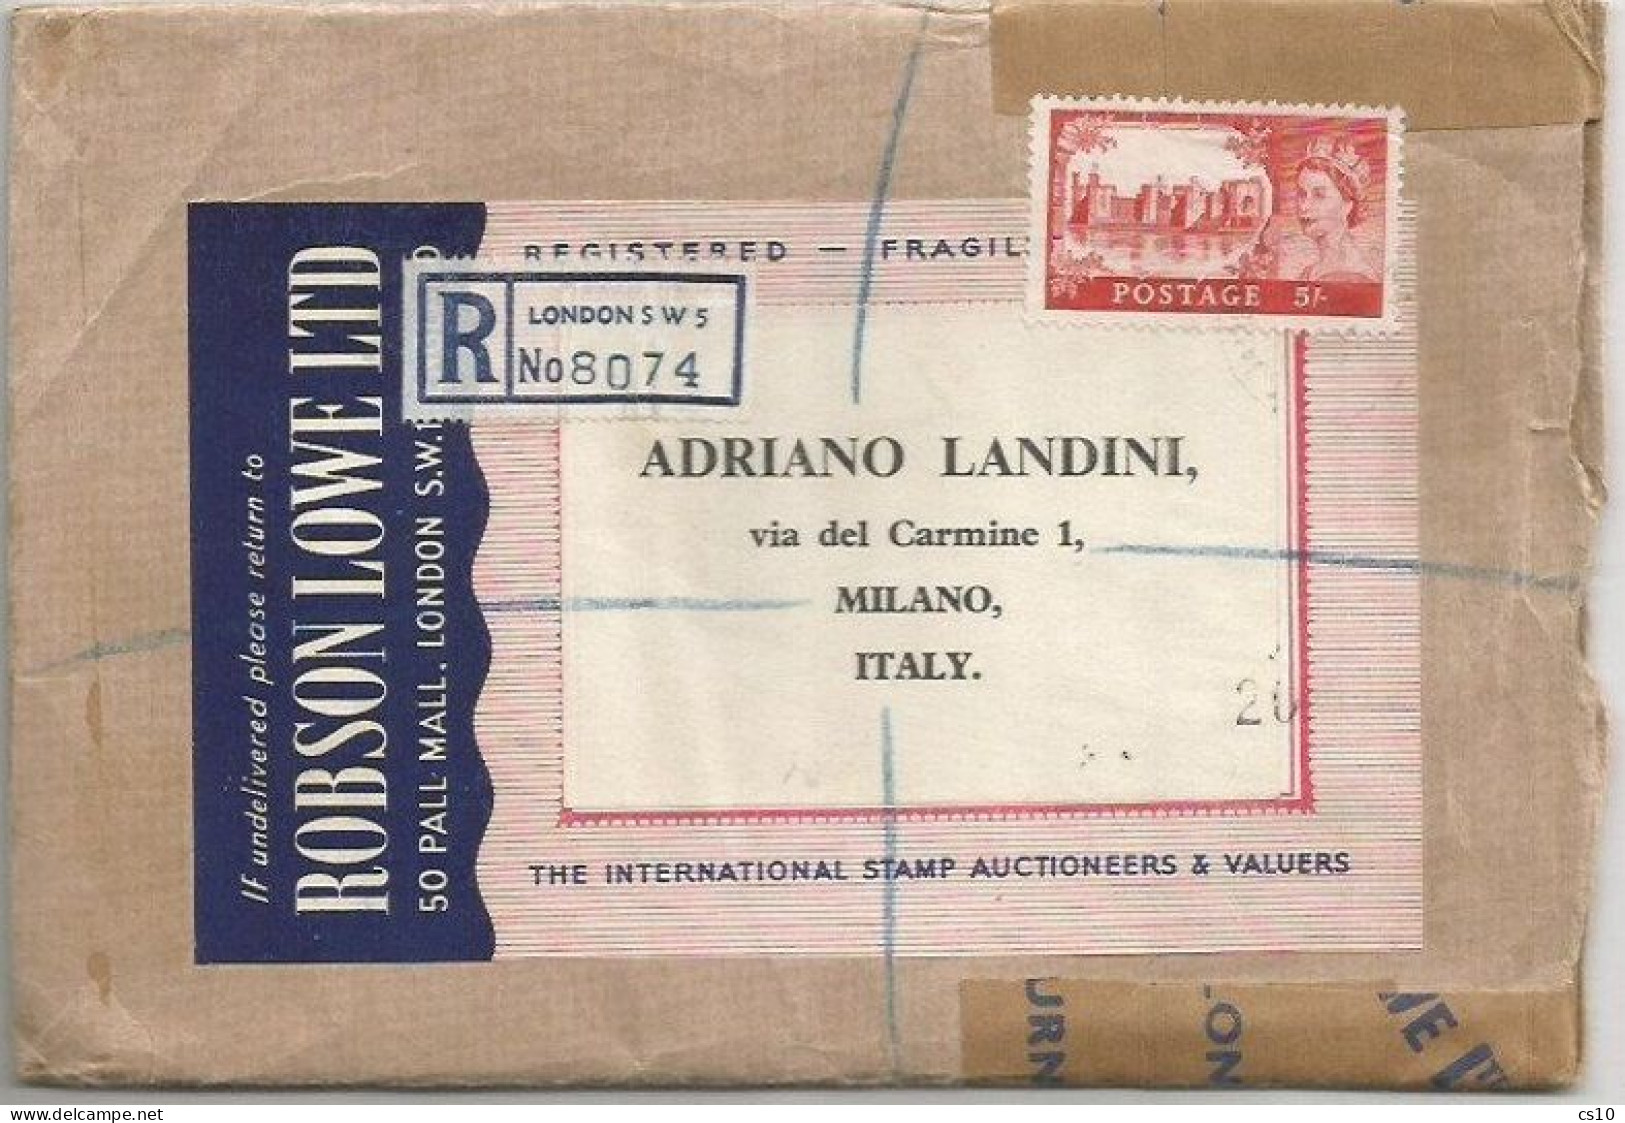 UK Britain Castles QE2 S5 Solo Franking Reg.CV London 3march 1967 To Italy - Marcofilie